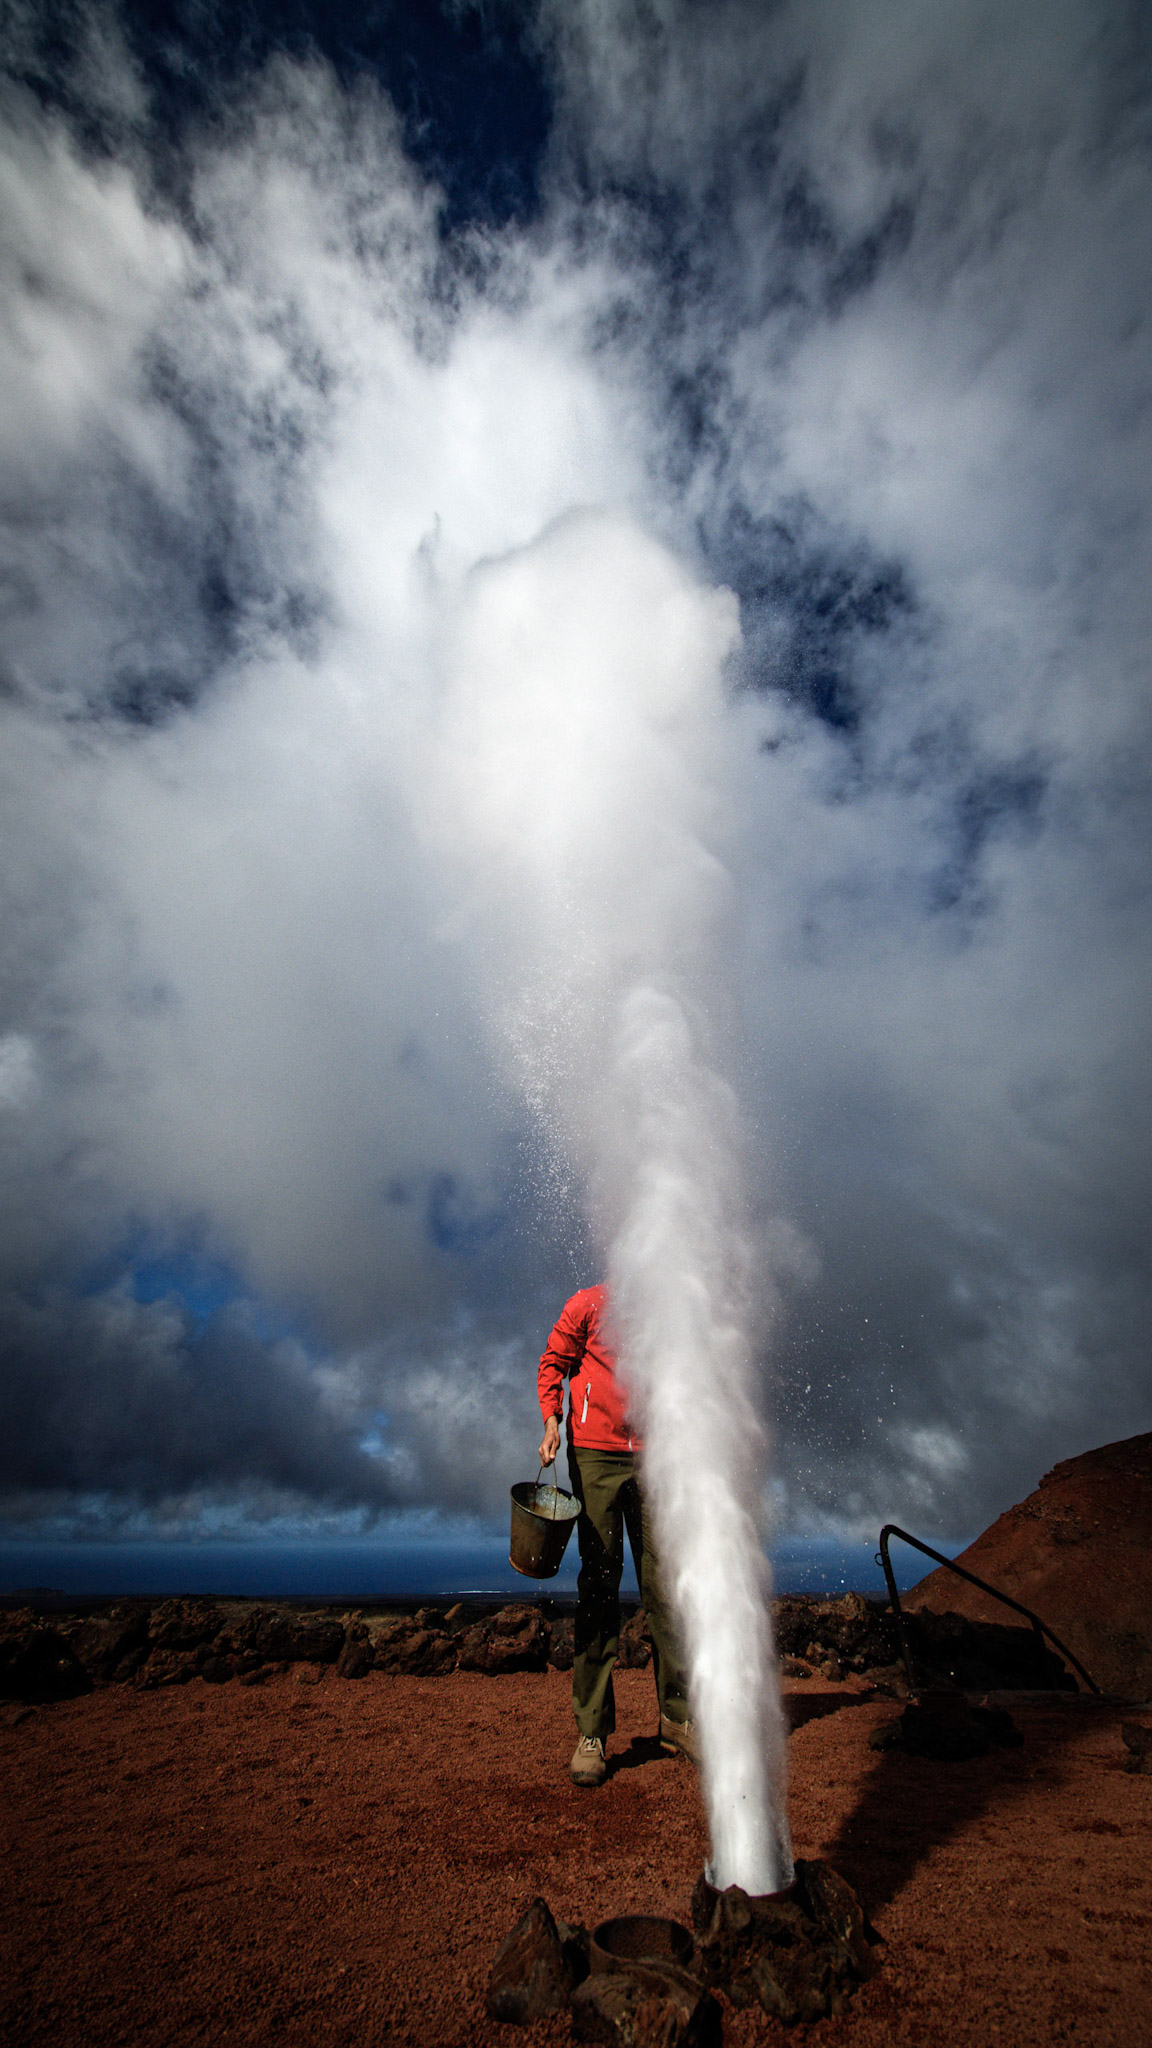 The first day of work at the geyser...